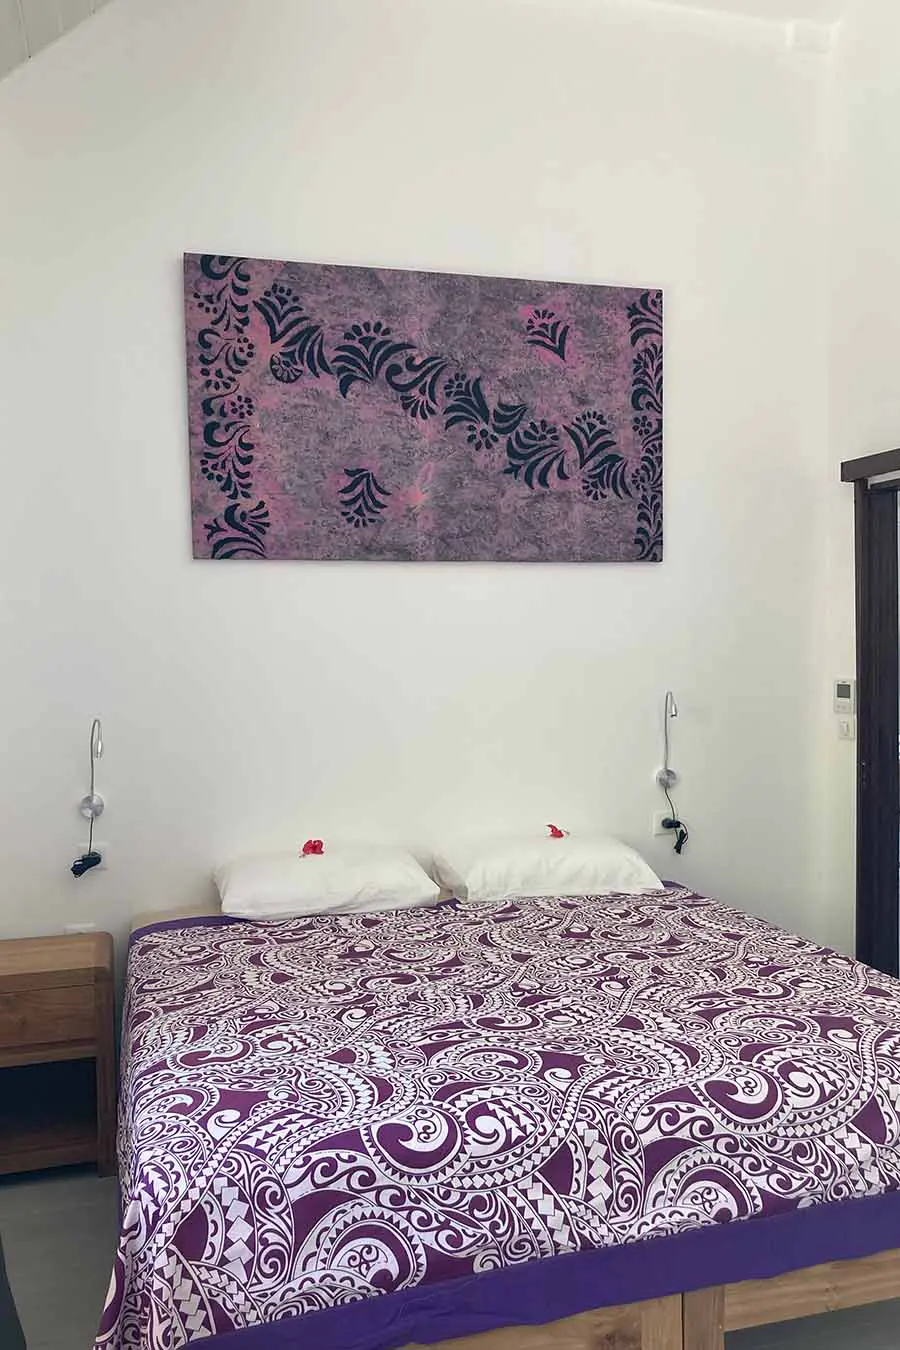 Double bed with artwork on the wall and lights in our vacation home in Bora Bora